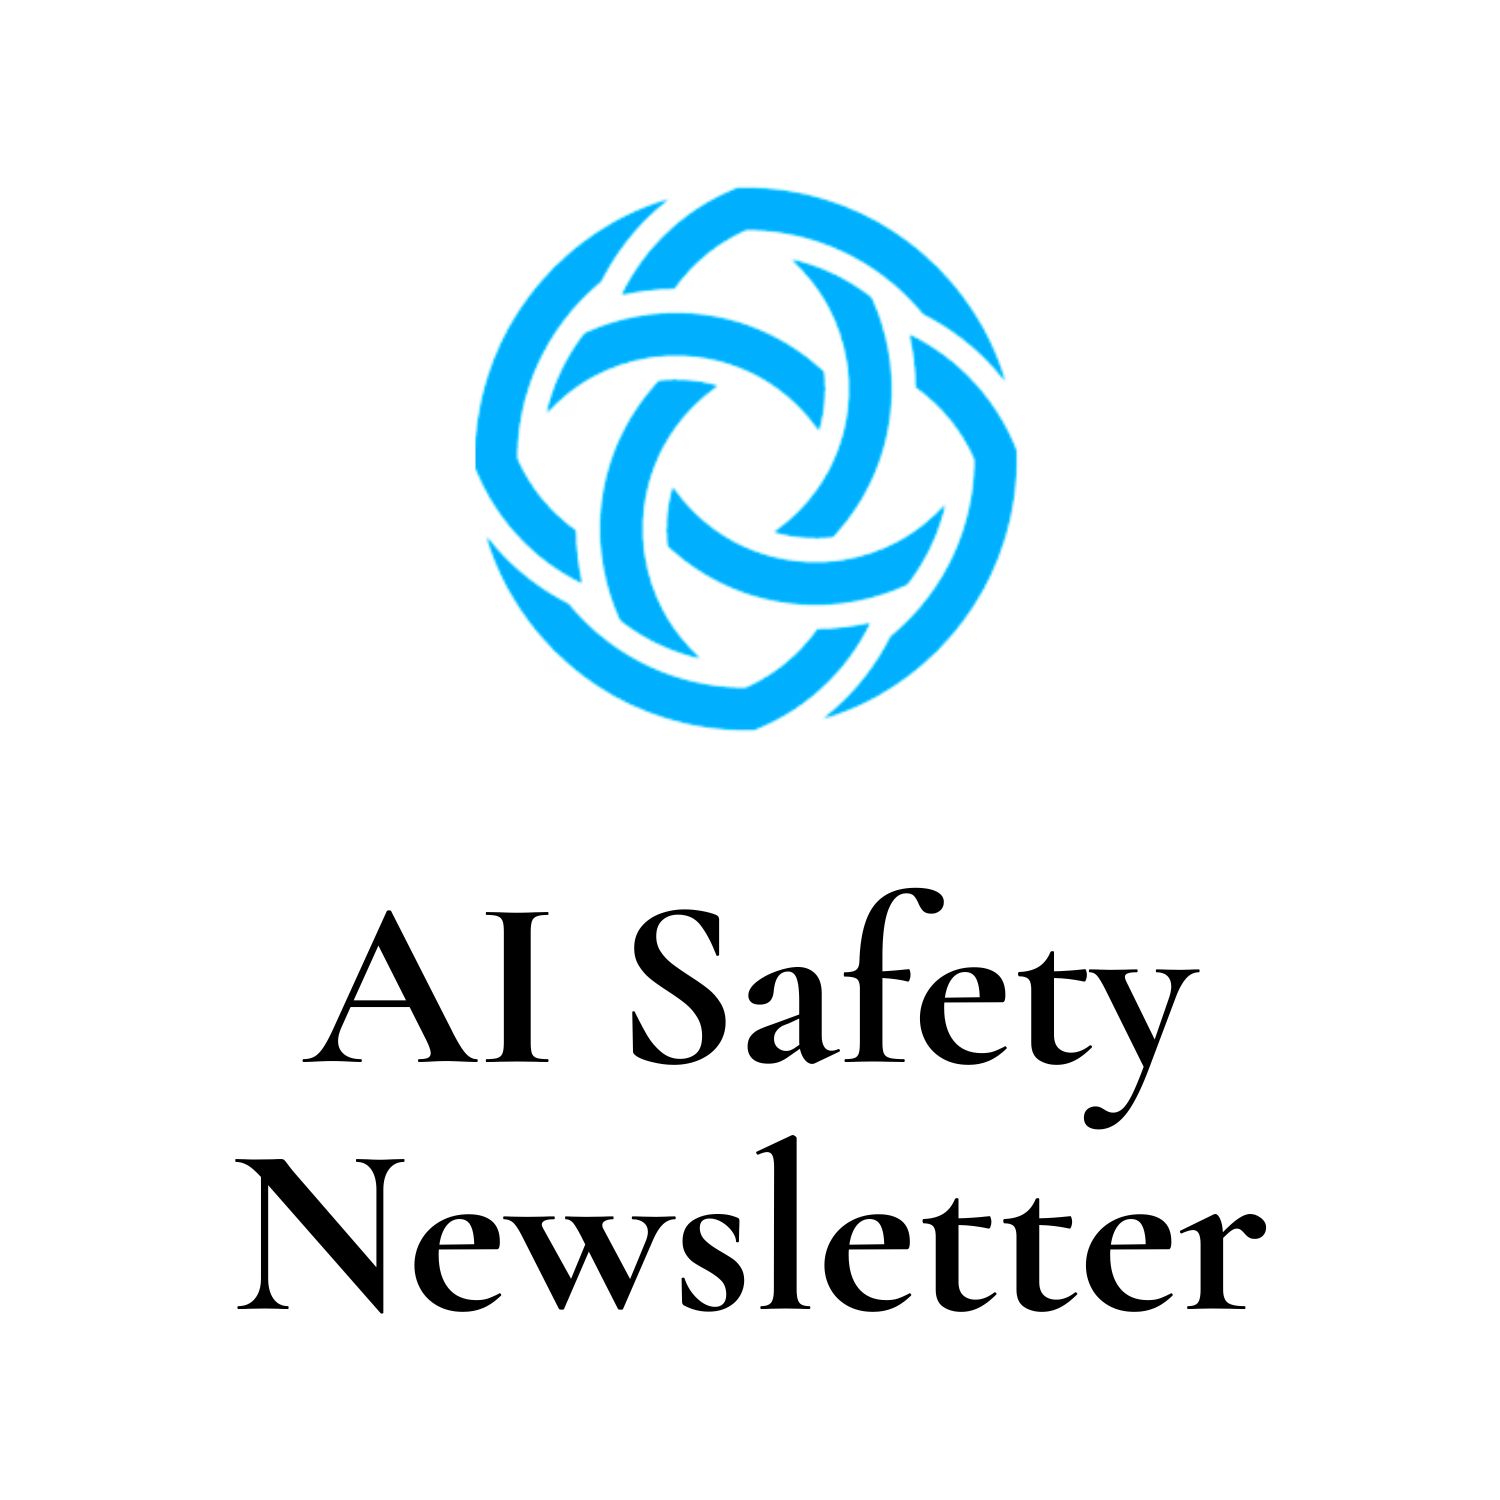 CAIS AI Safety Newsletter Podcast